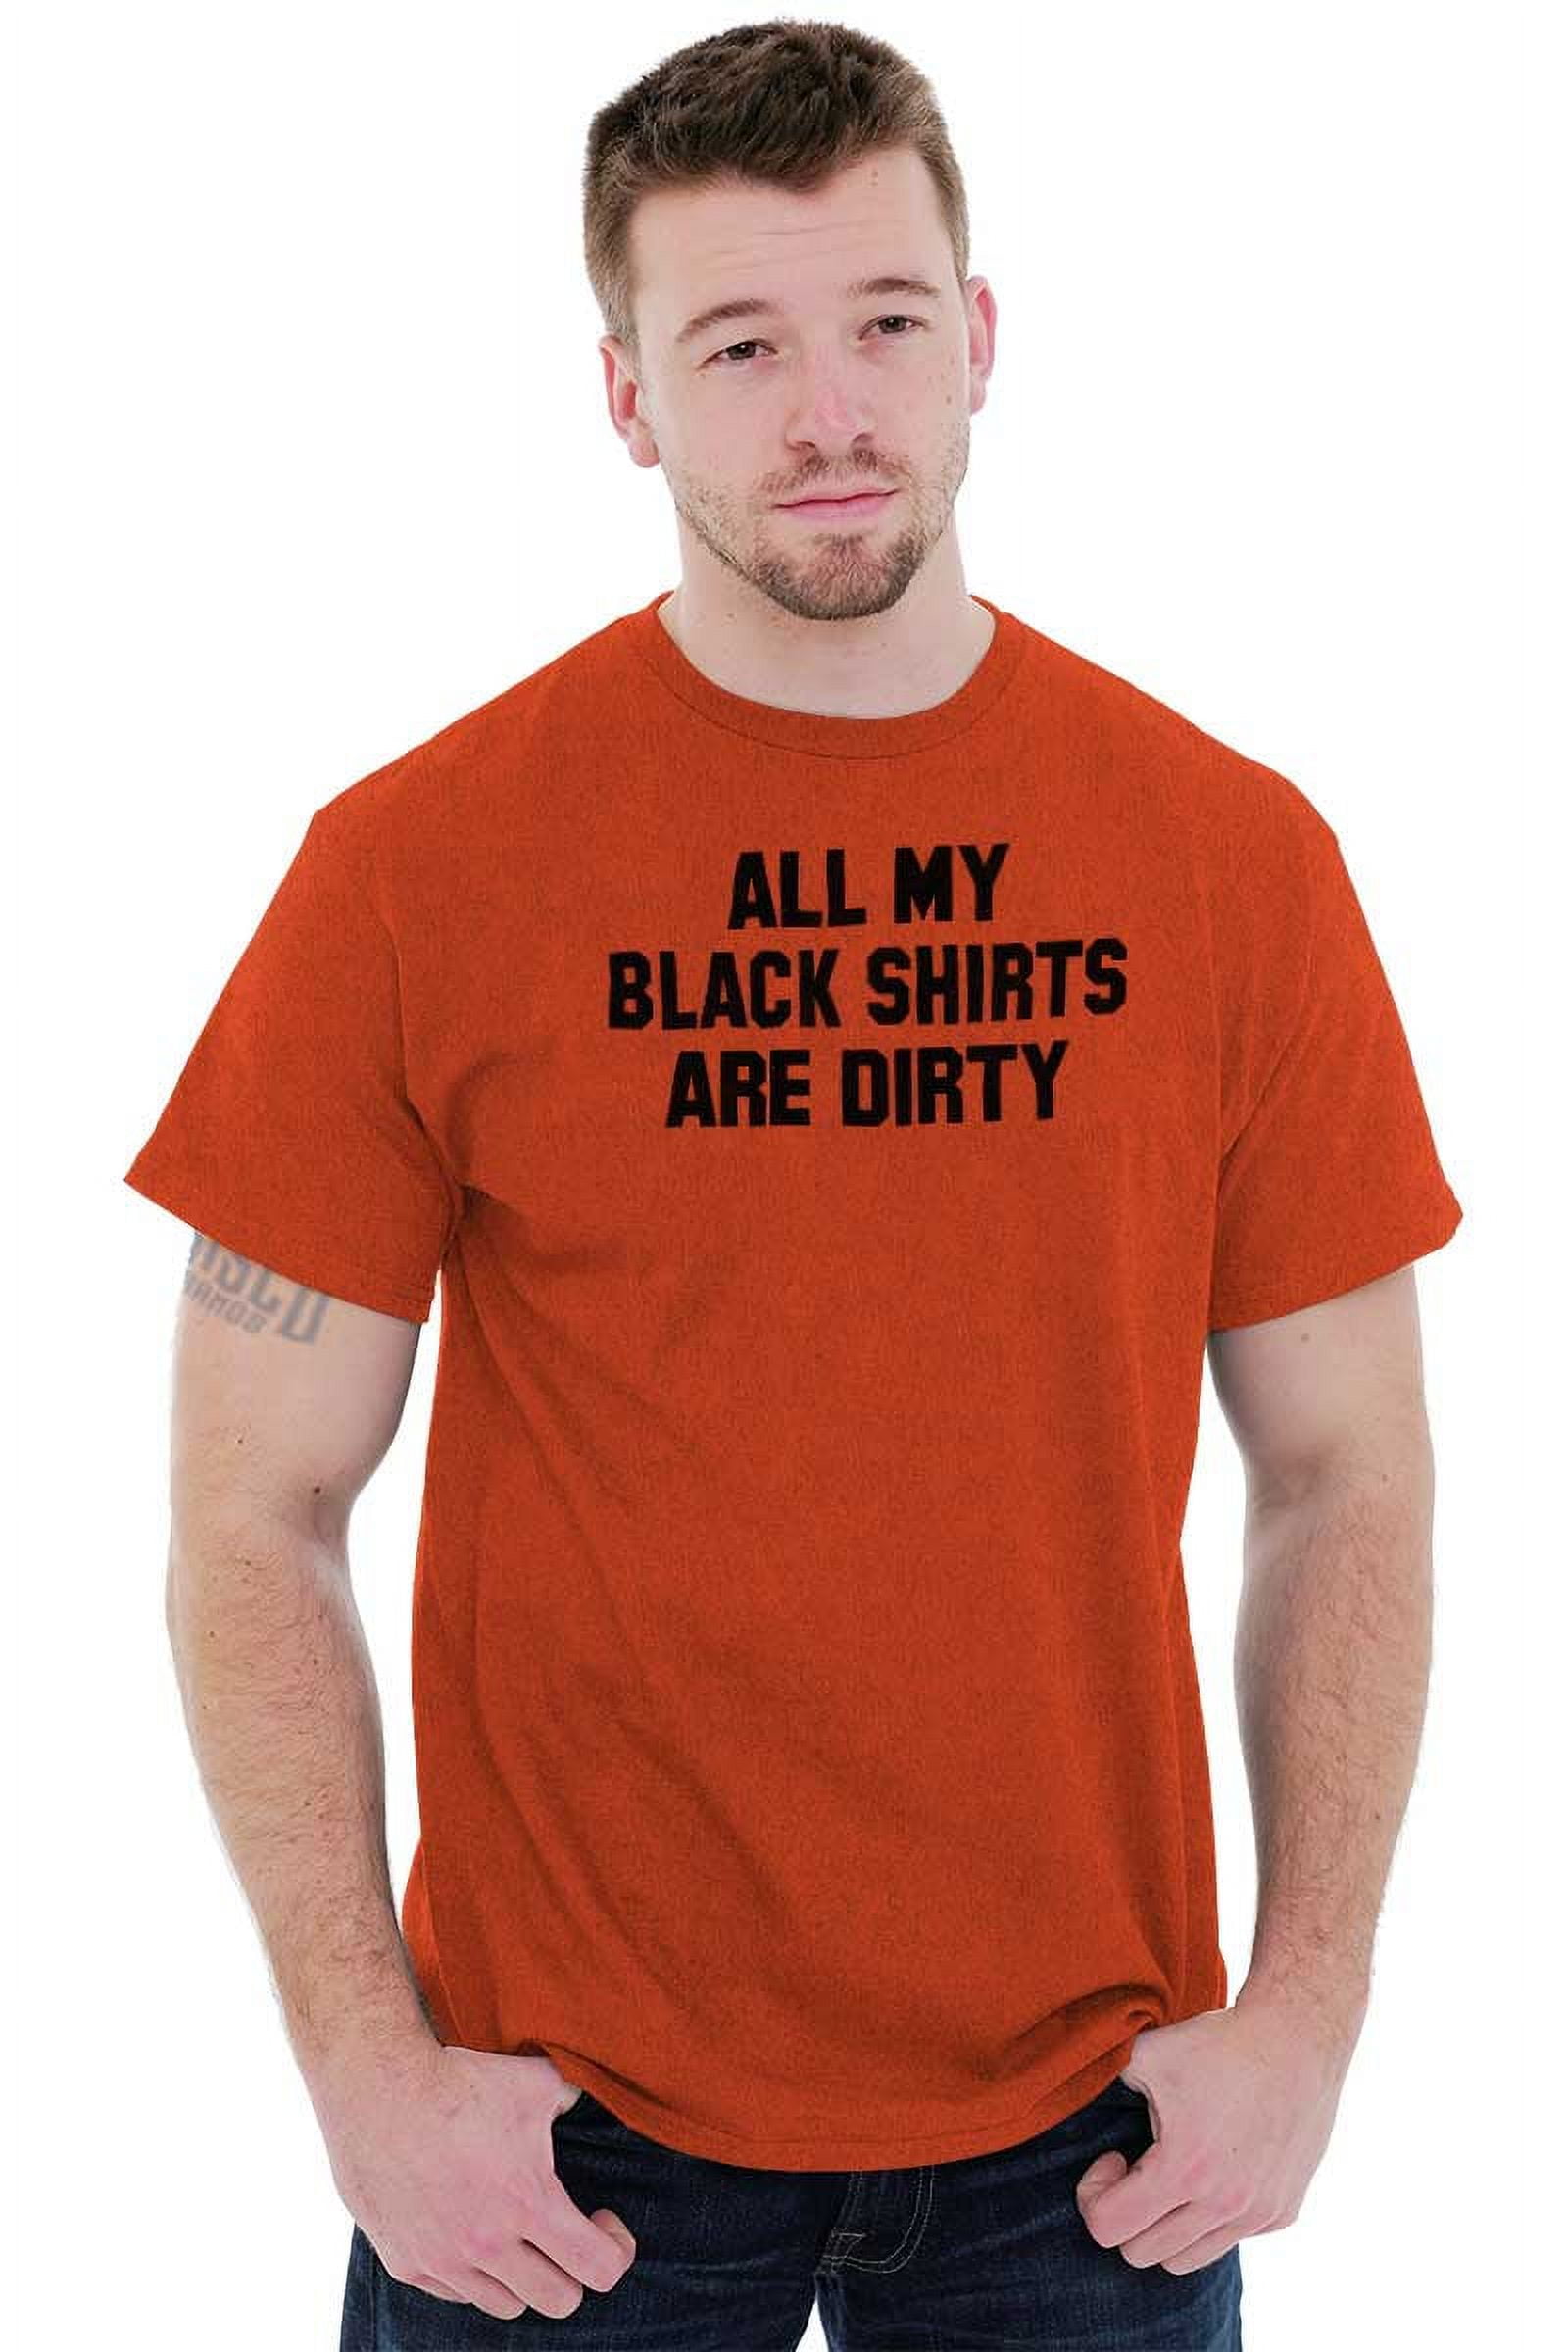 Black Shirts Dirty Laundry Day Gym Men's Graphic T Shirt Tees